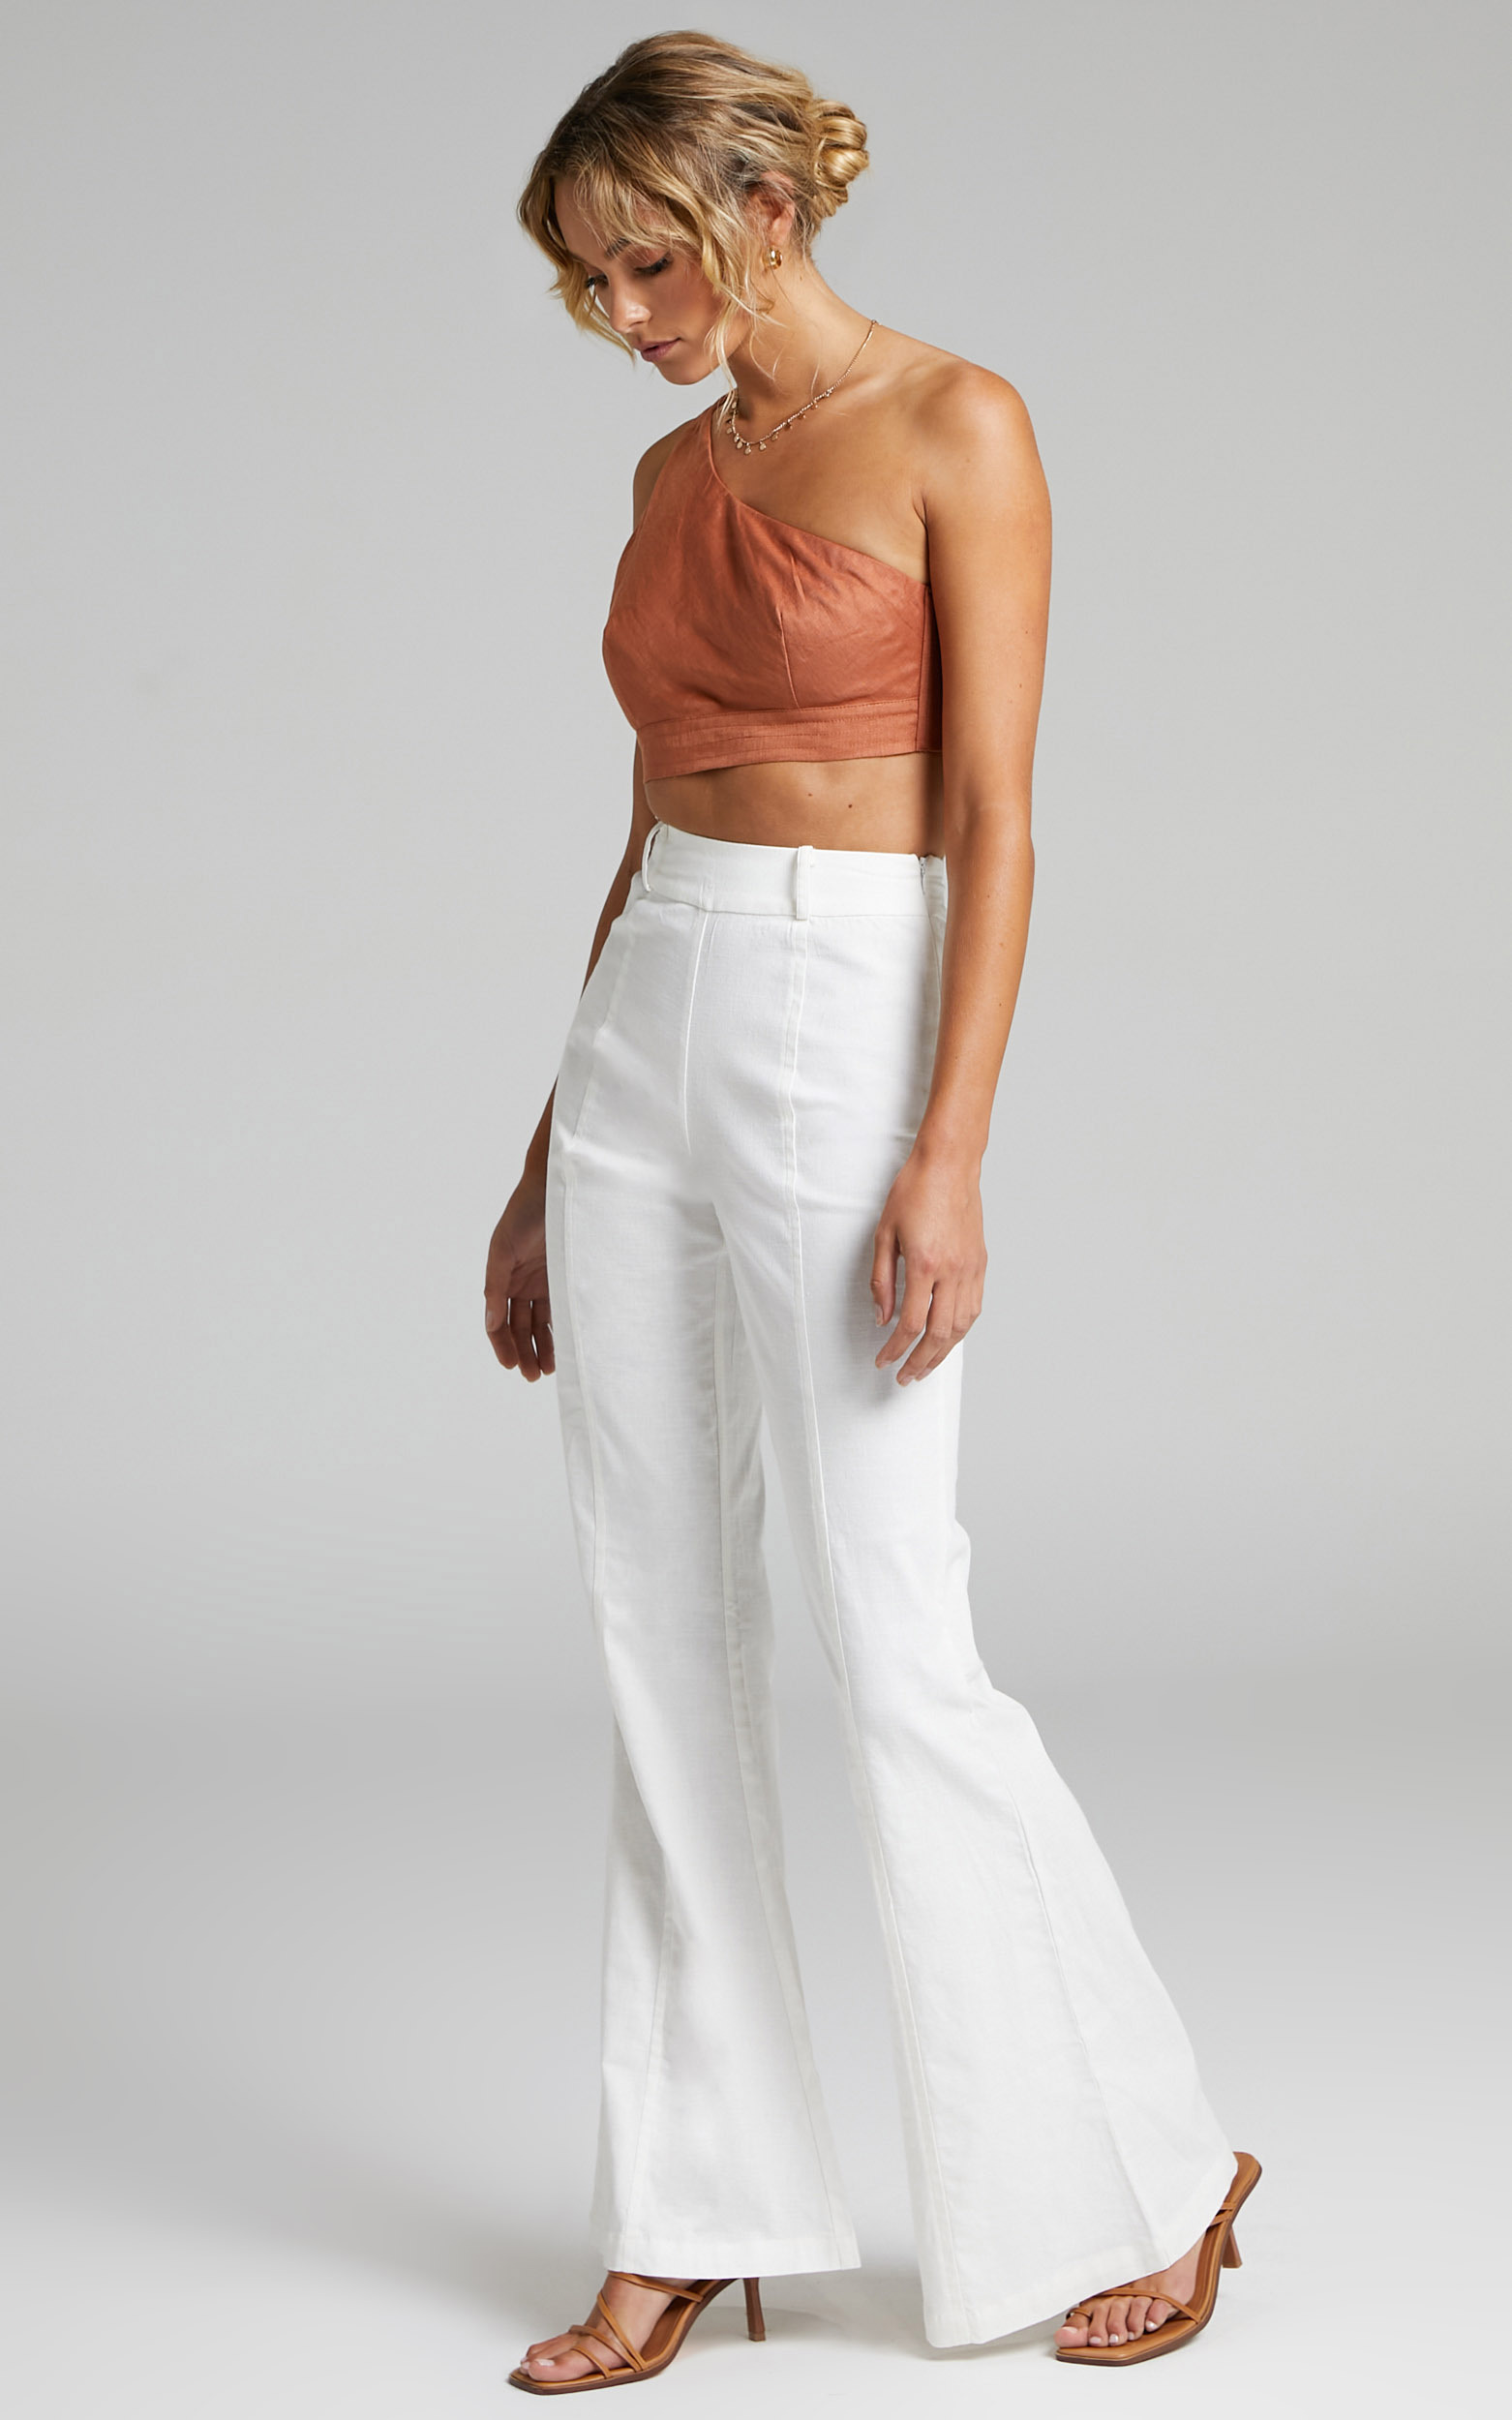 Chielo High Rise Fit and Flare Pant in White - 04, WHT1, hi-res image number null